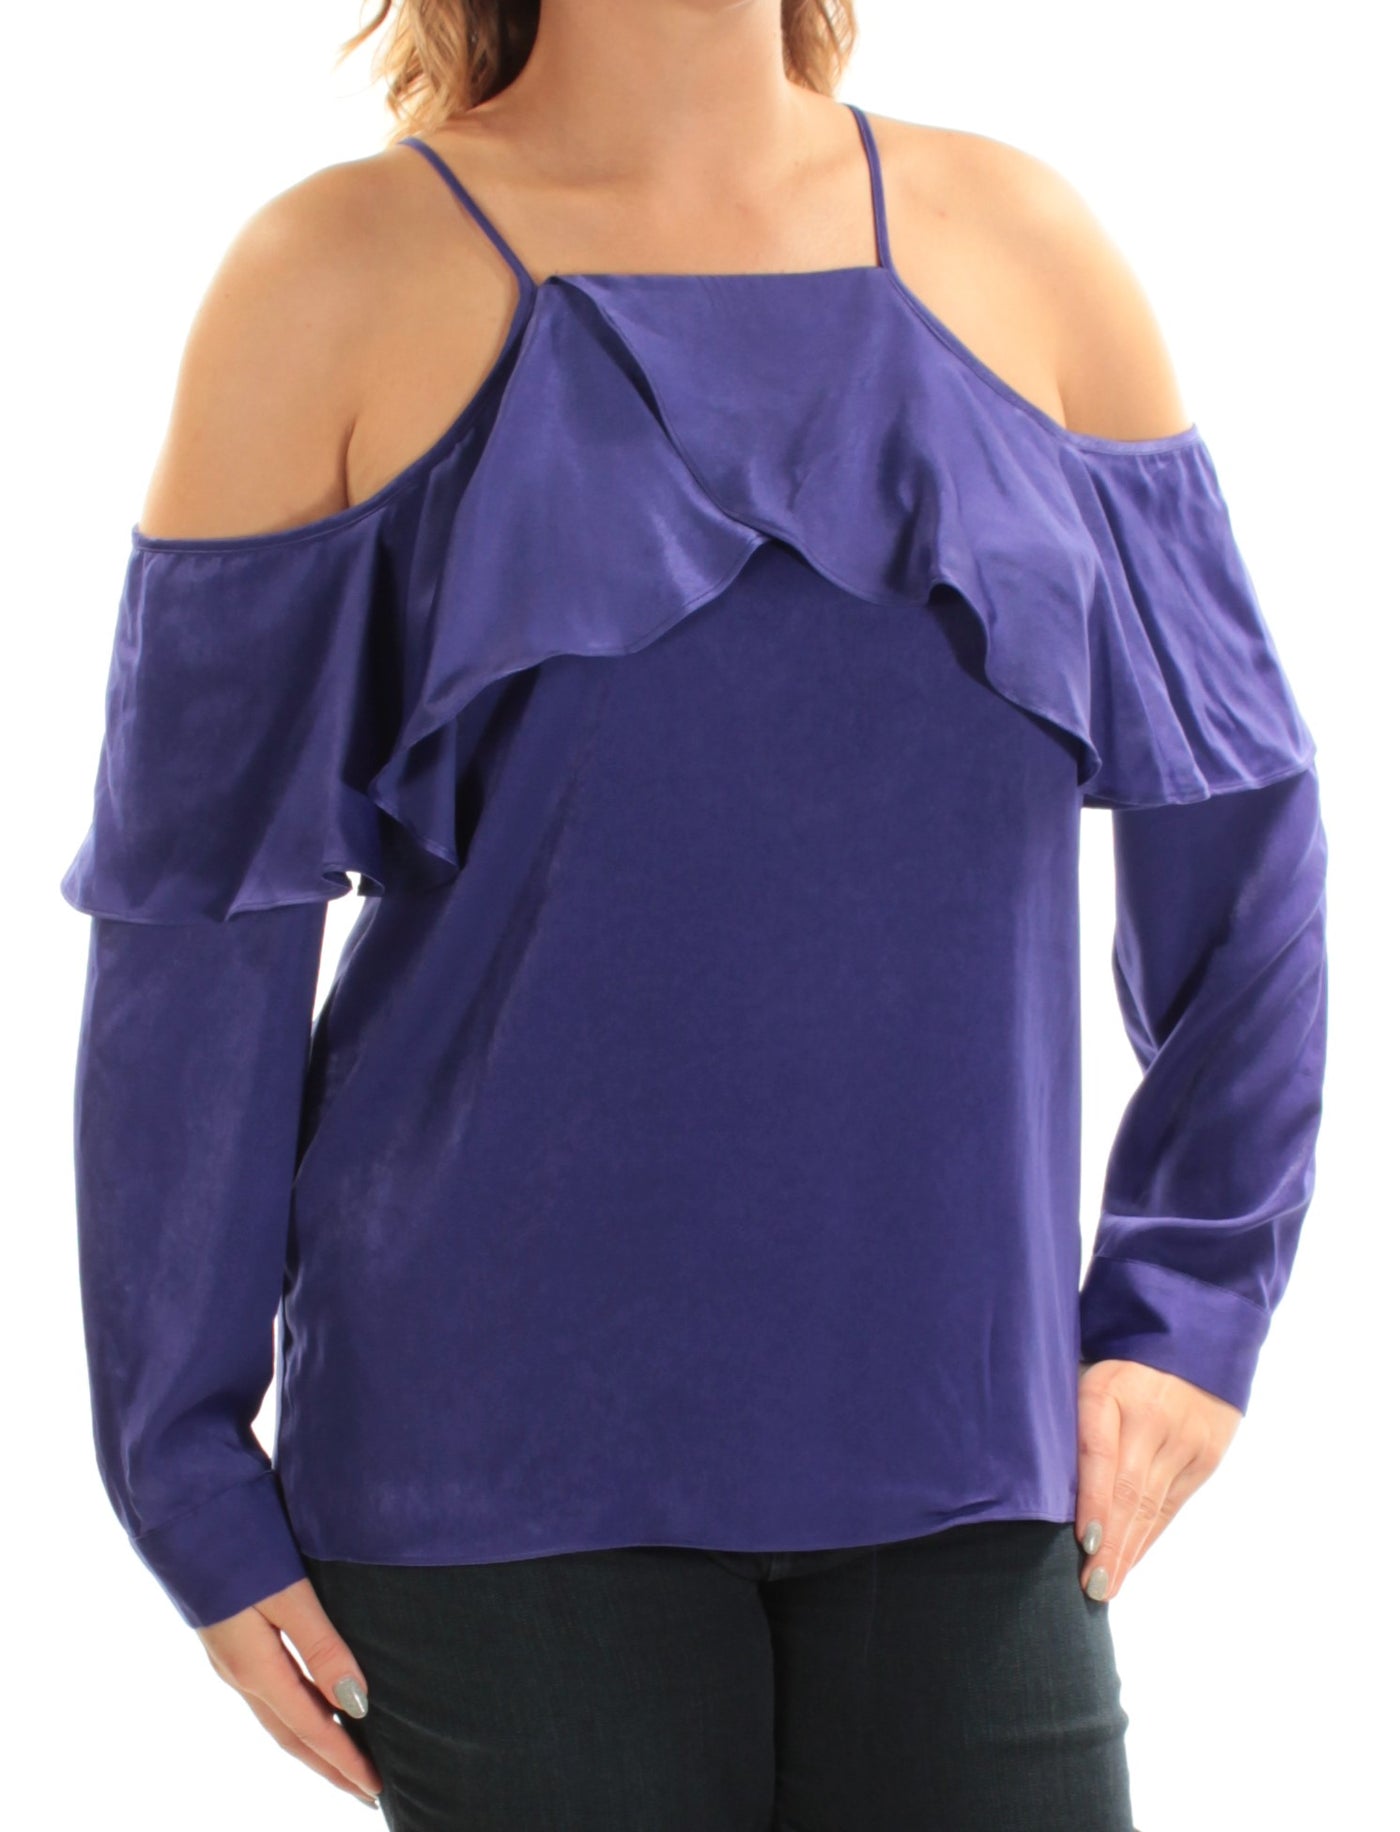 BAR III Womens Purple Cold Shoulder Long Sleeve Square Neck Top